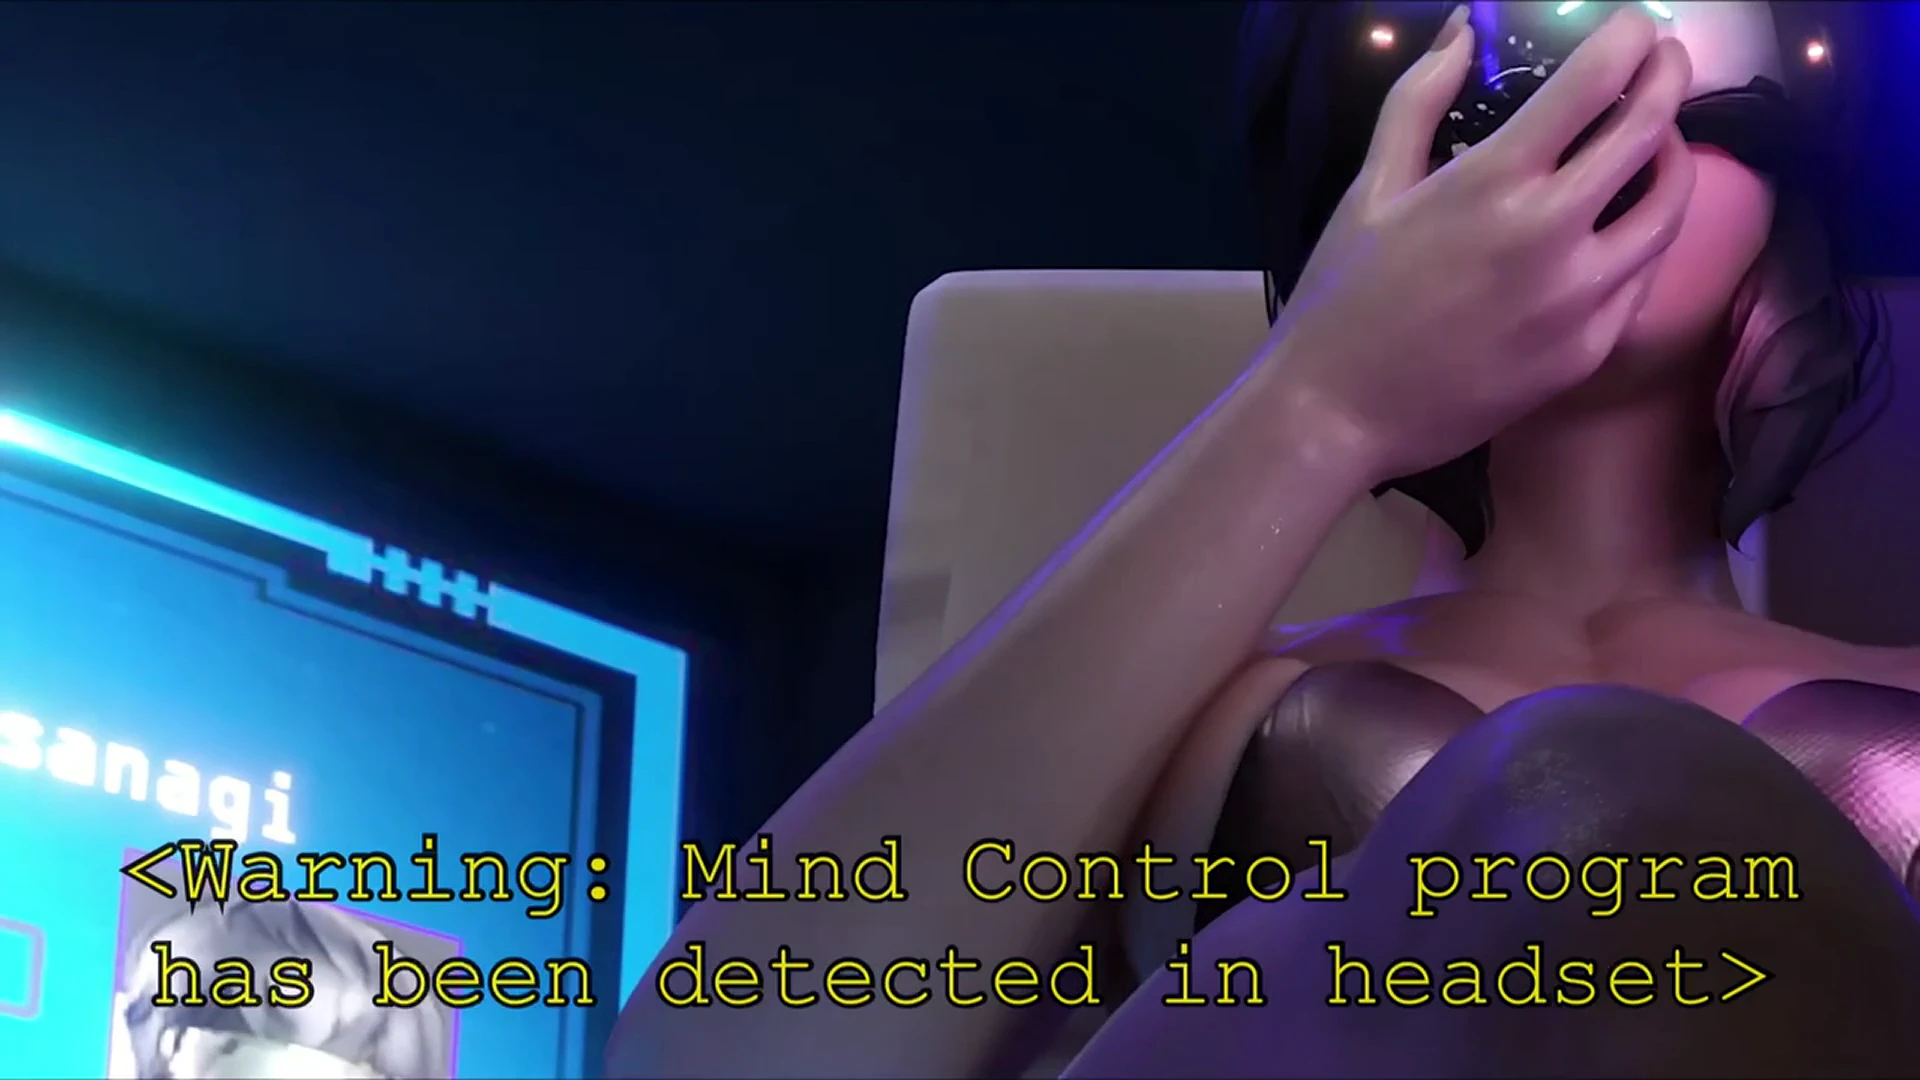 Fuck... That can't really happen in VR... Right? Gooning and mind controlled endlessly...